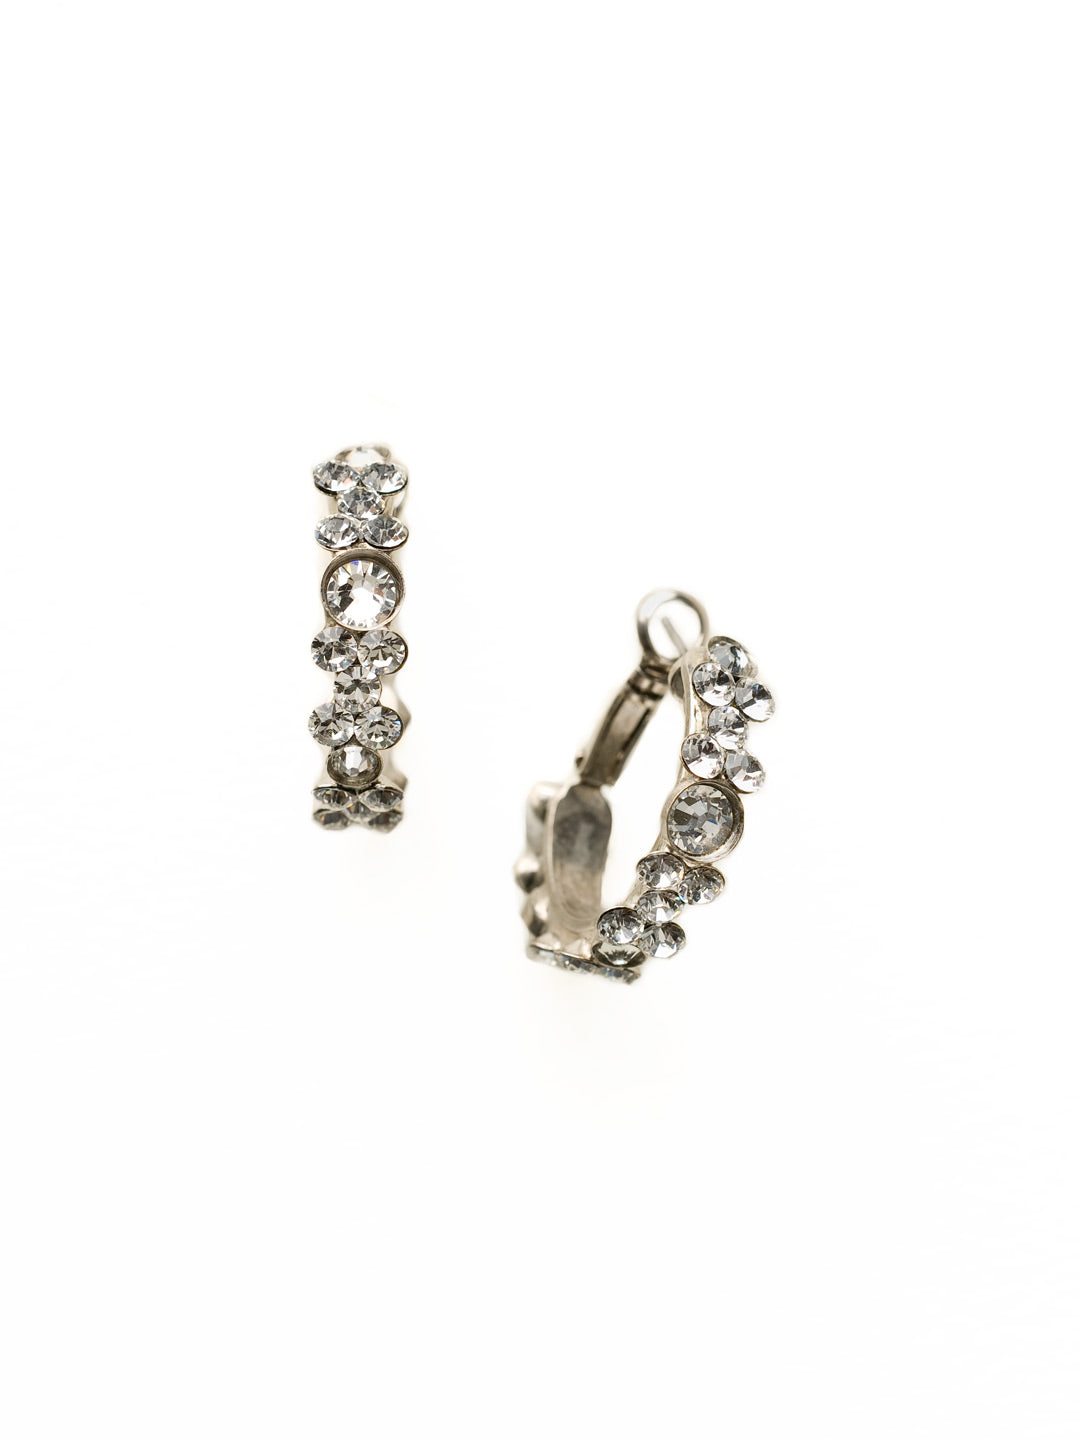 Floral Hoop Earrings - EBP15ASCRY - <p>Intricate design, infused with gorgeous shine. A motif of floral clusters is featured here on a small, delicate hoop with a hinged post backing. From Sorrelli's Crystal collection in our Antique Silver-tone finish.</p>